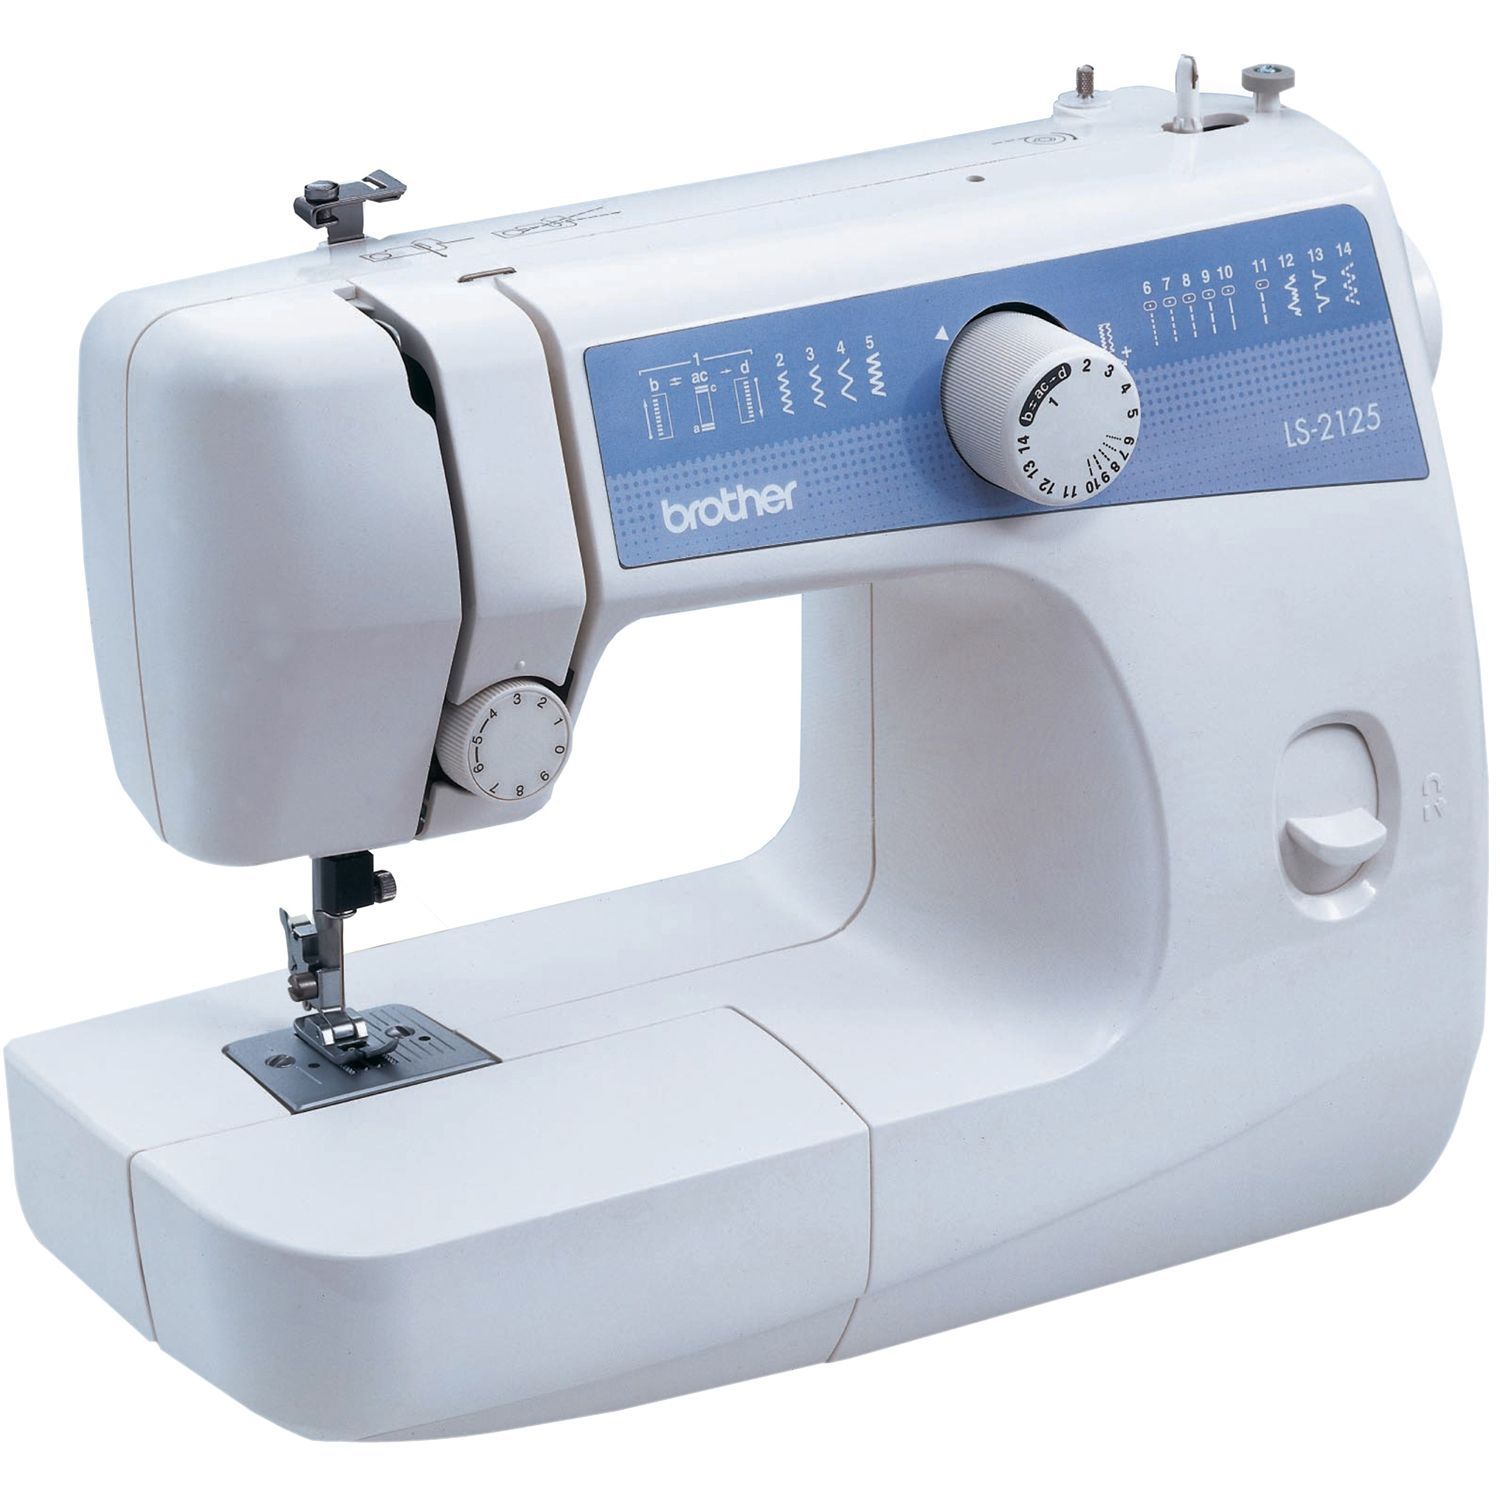 Brother LS-2125i Mechanical Sewing Machine for sale online